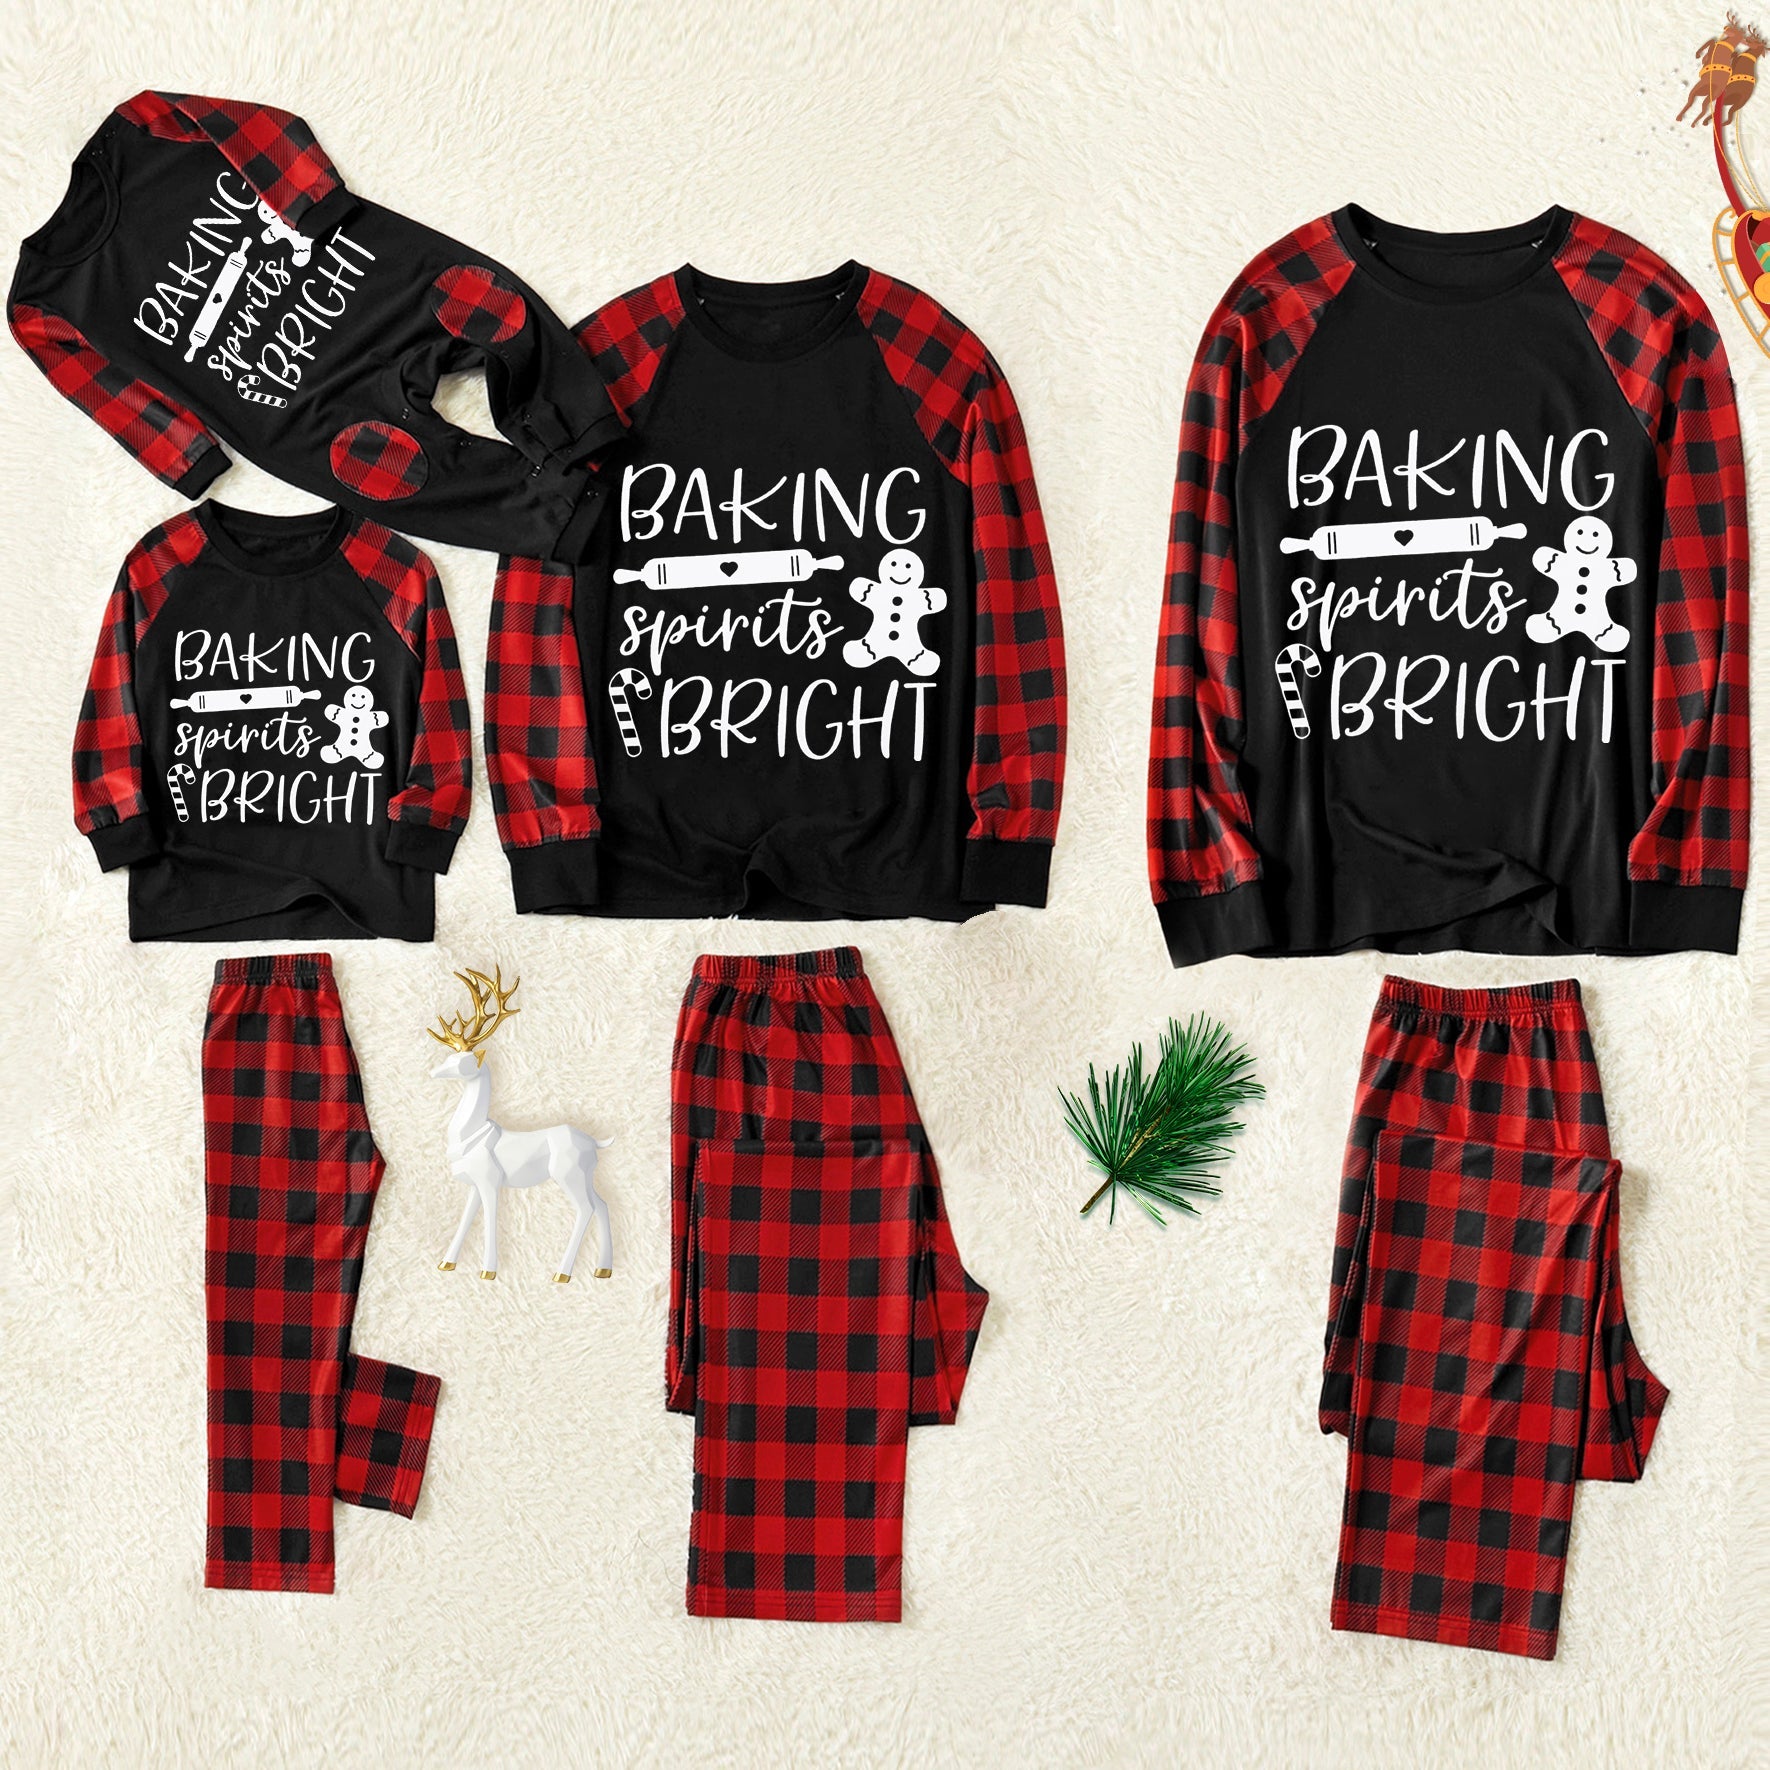 Christmas "Baking Spirits Bright" Letter Print Patterned Contrast Black top and Black & Red Plaid Pants Family Matching Pajamas Set With Dog Bandana